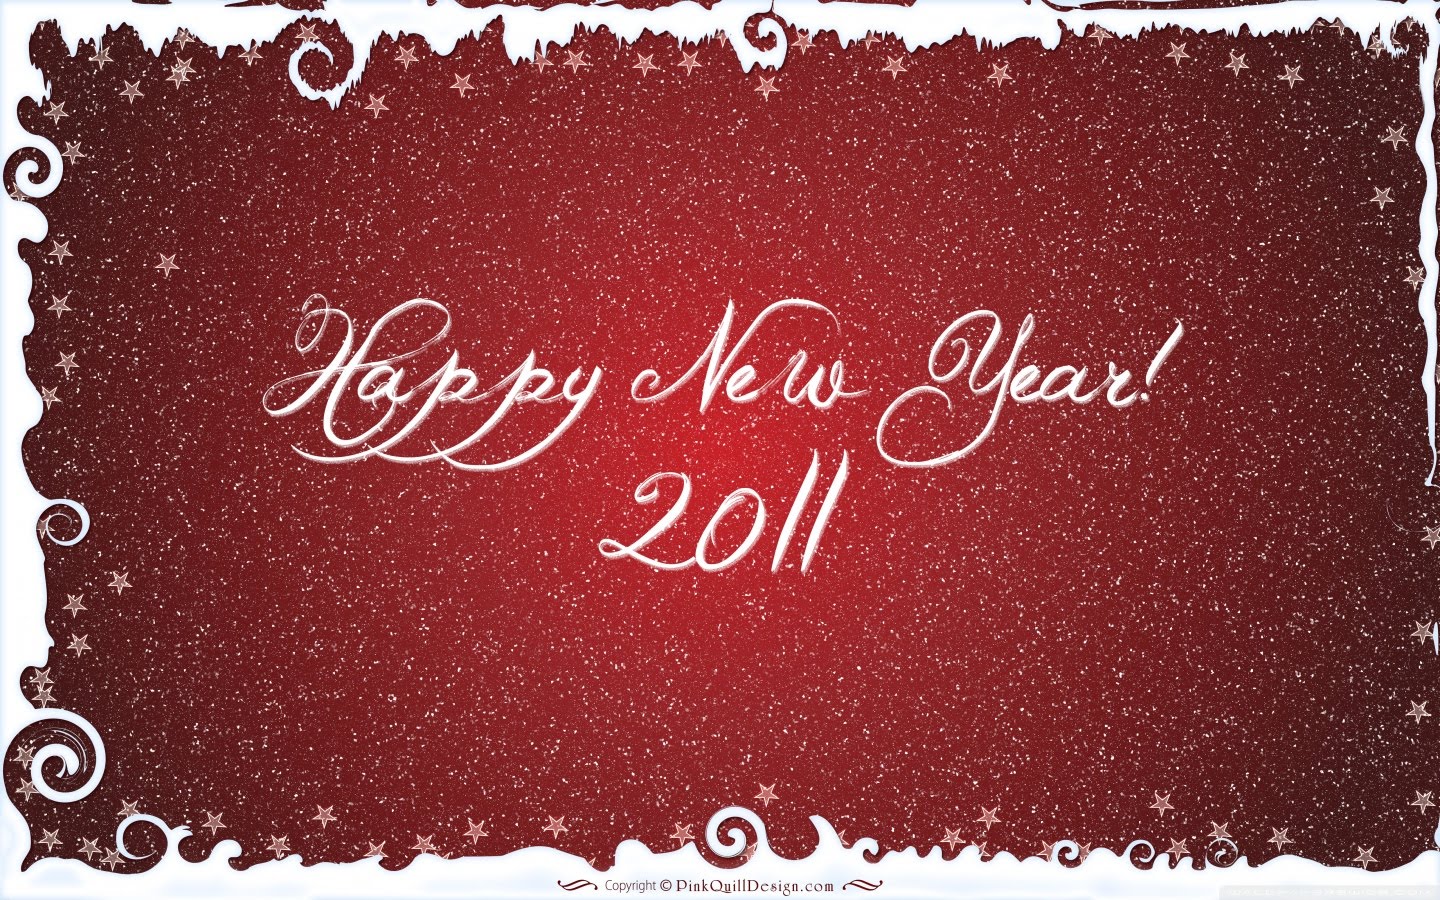 Happy New Year Red Christian Wallpaper Free Download - New Year Wishes For Office - HD Wallpaper 